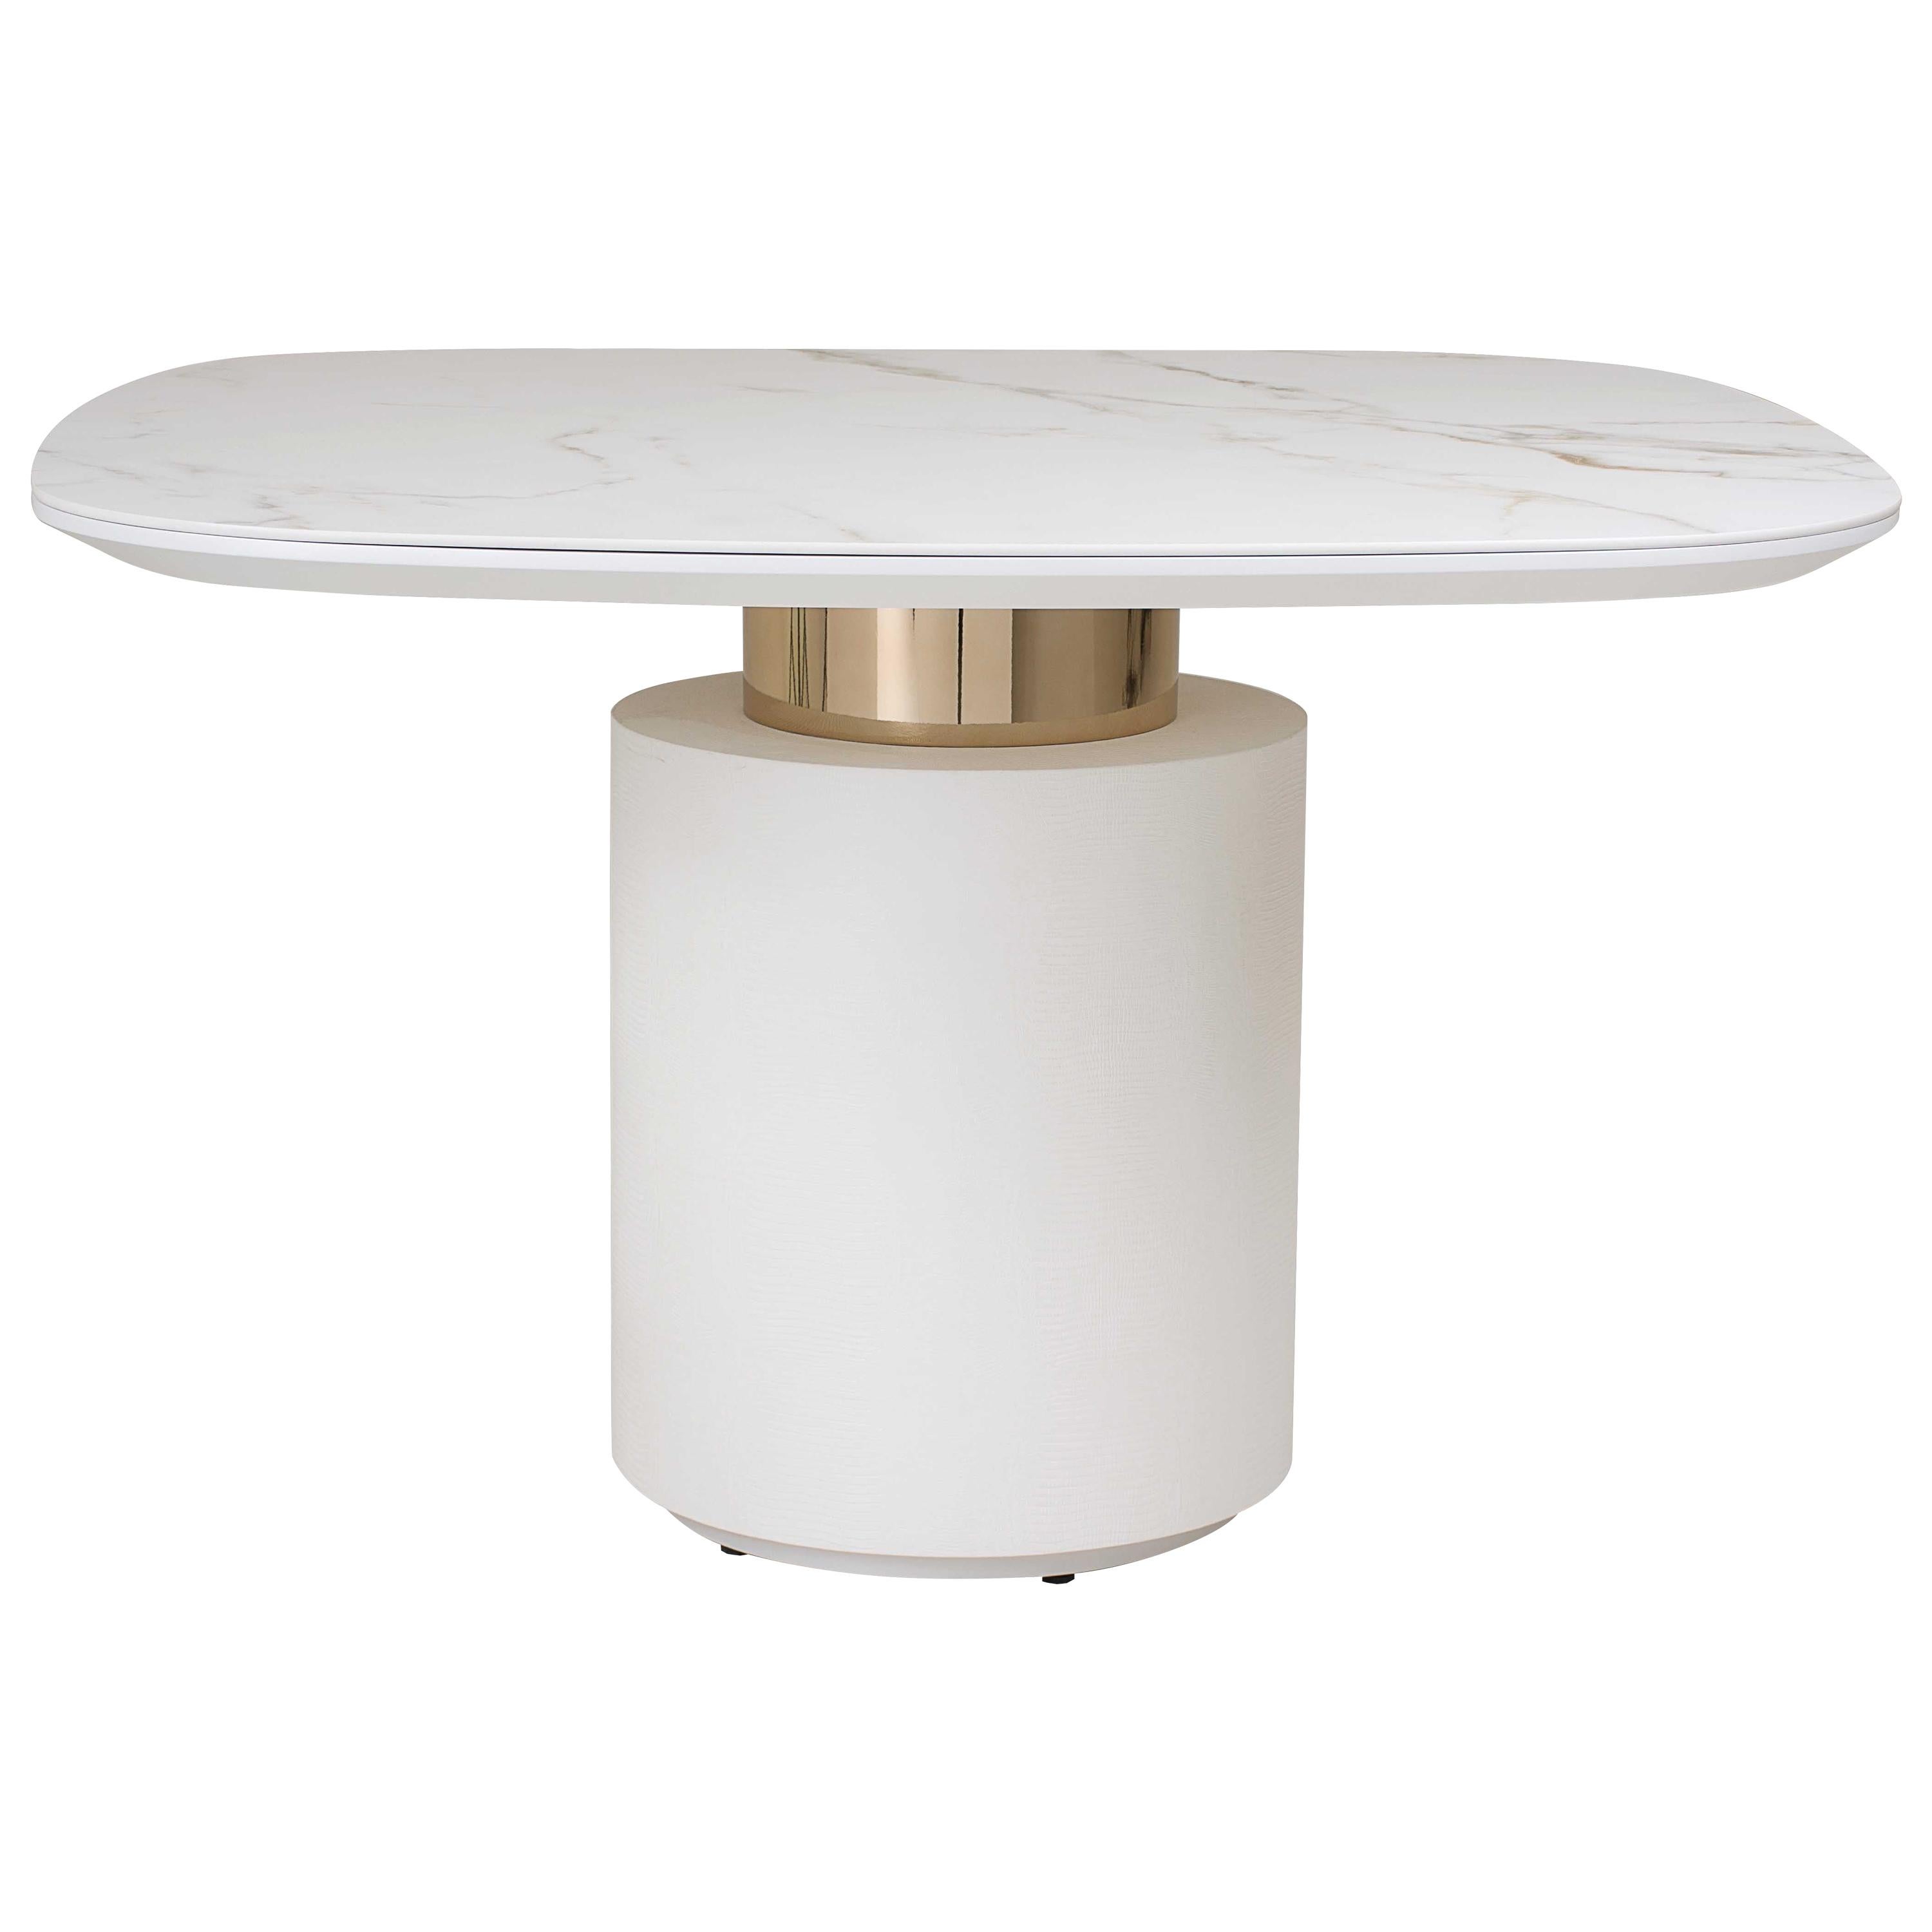 Square table with round edges Neruda, Stone Edition For Sale